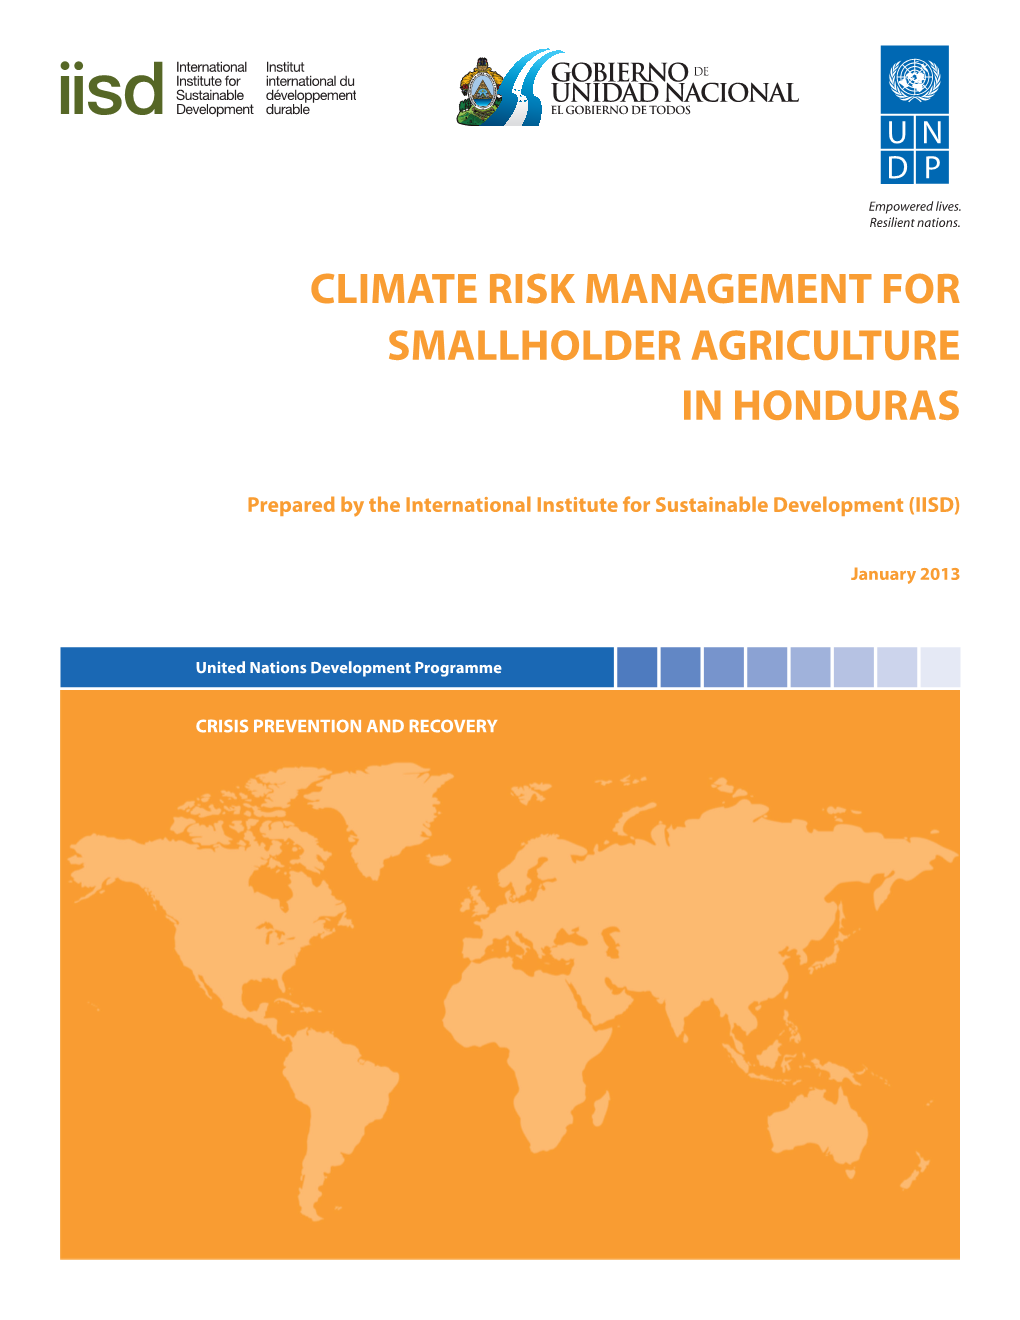 Climate Risk Management for Smallholder Agriculture in Honduras